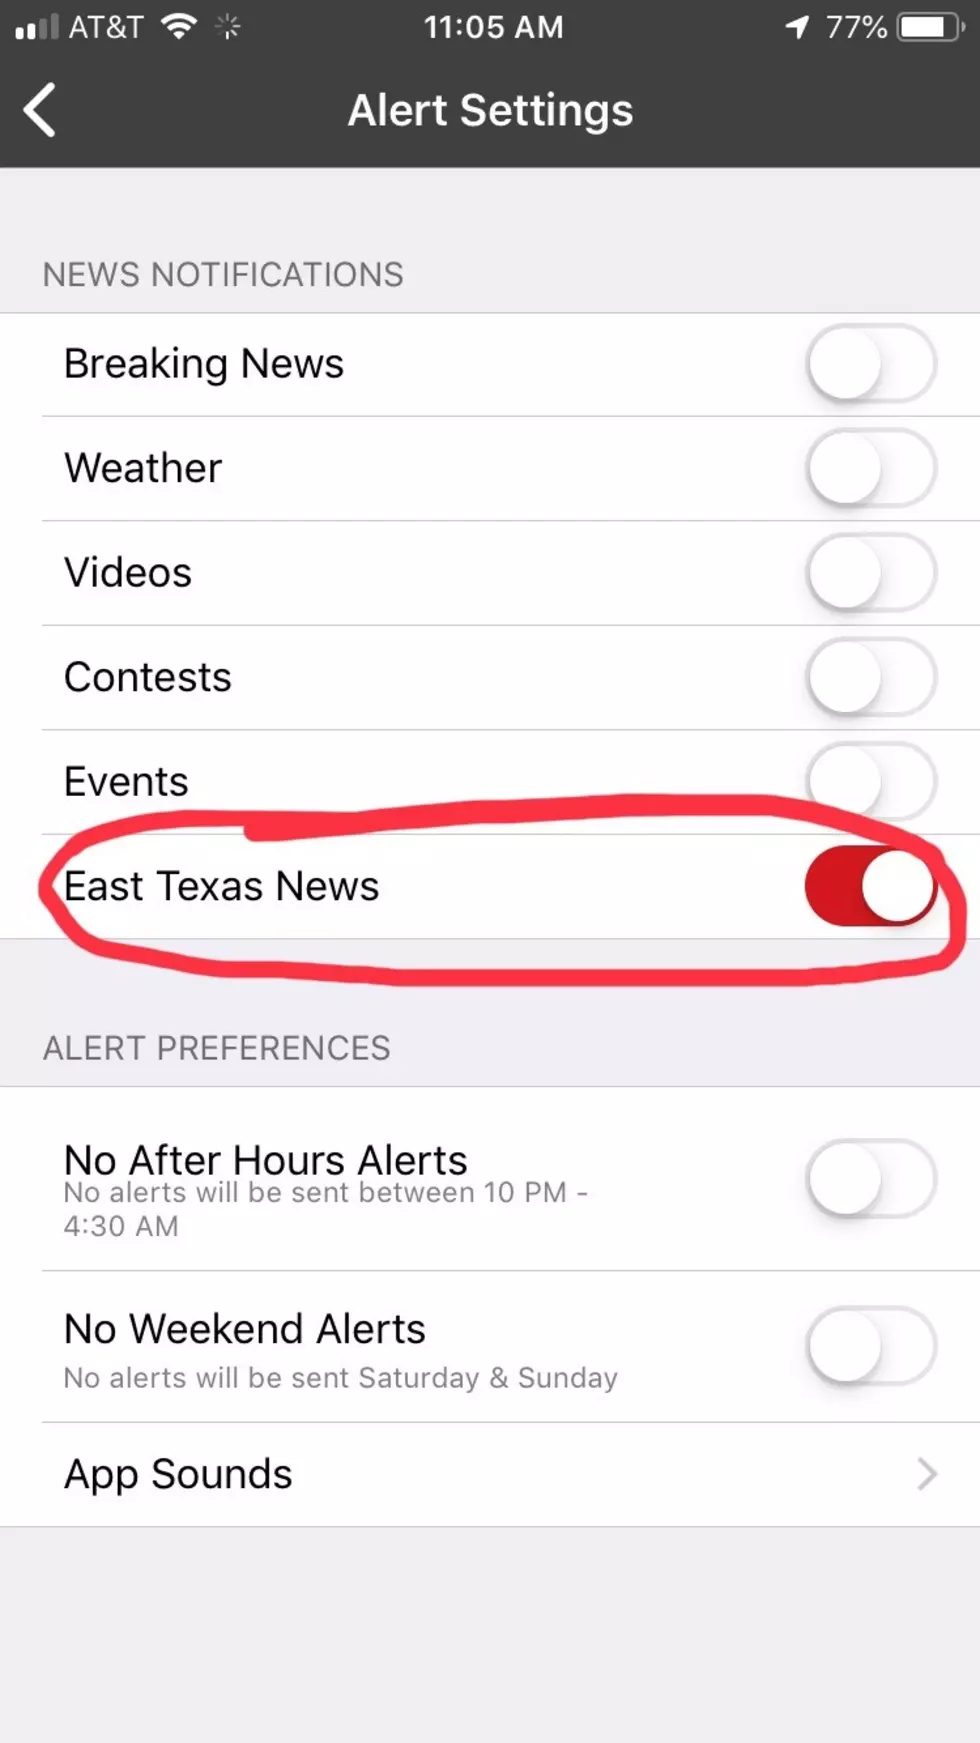 Check Out The Q107 App With An ‘East Texas News’ Alert Feature